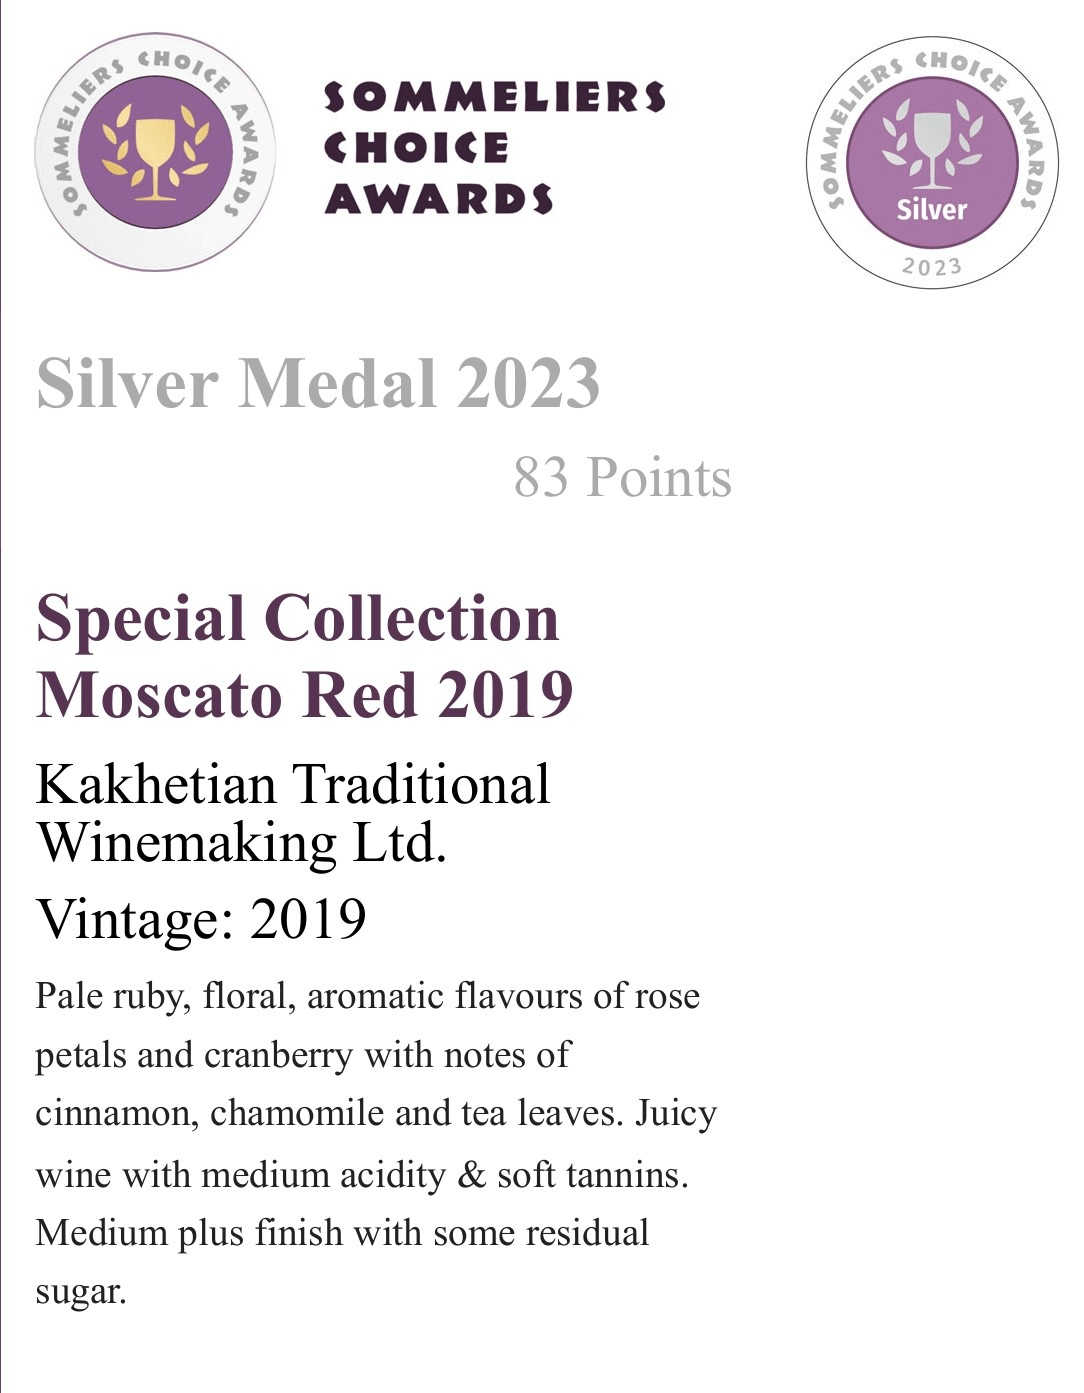 Sommeliers Choice Awards moskato_page-0001-min